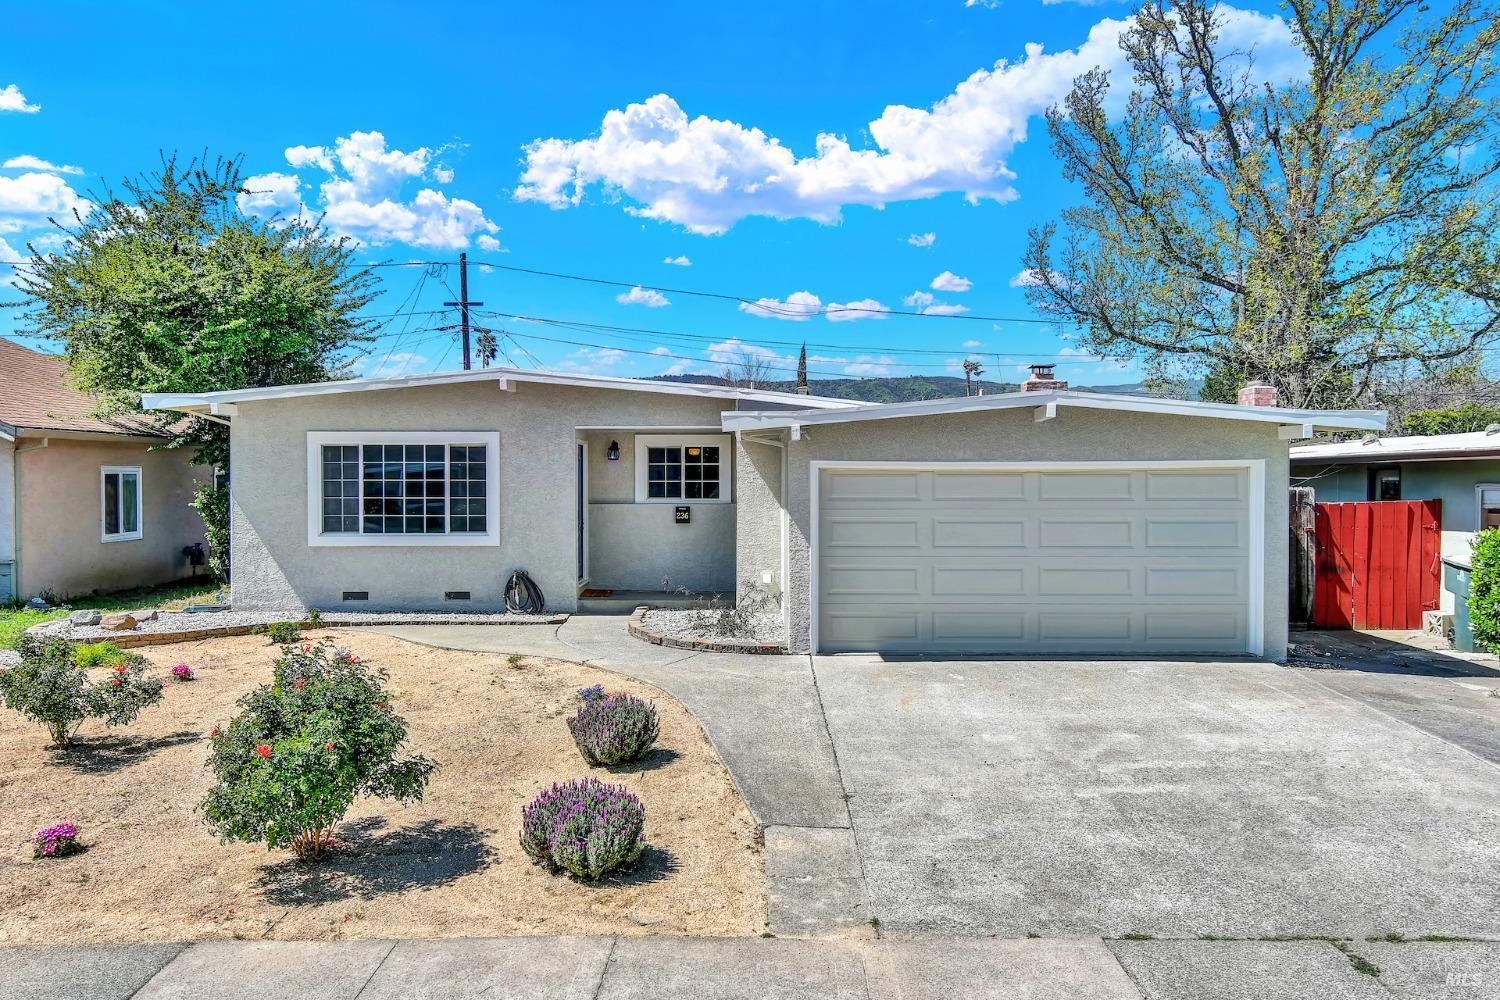 Photo of 236 Madrone St in Vacaville, CA